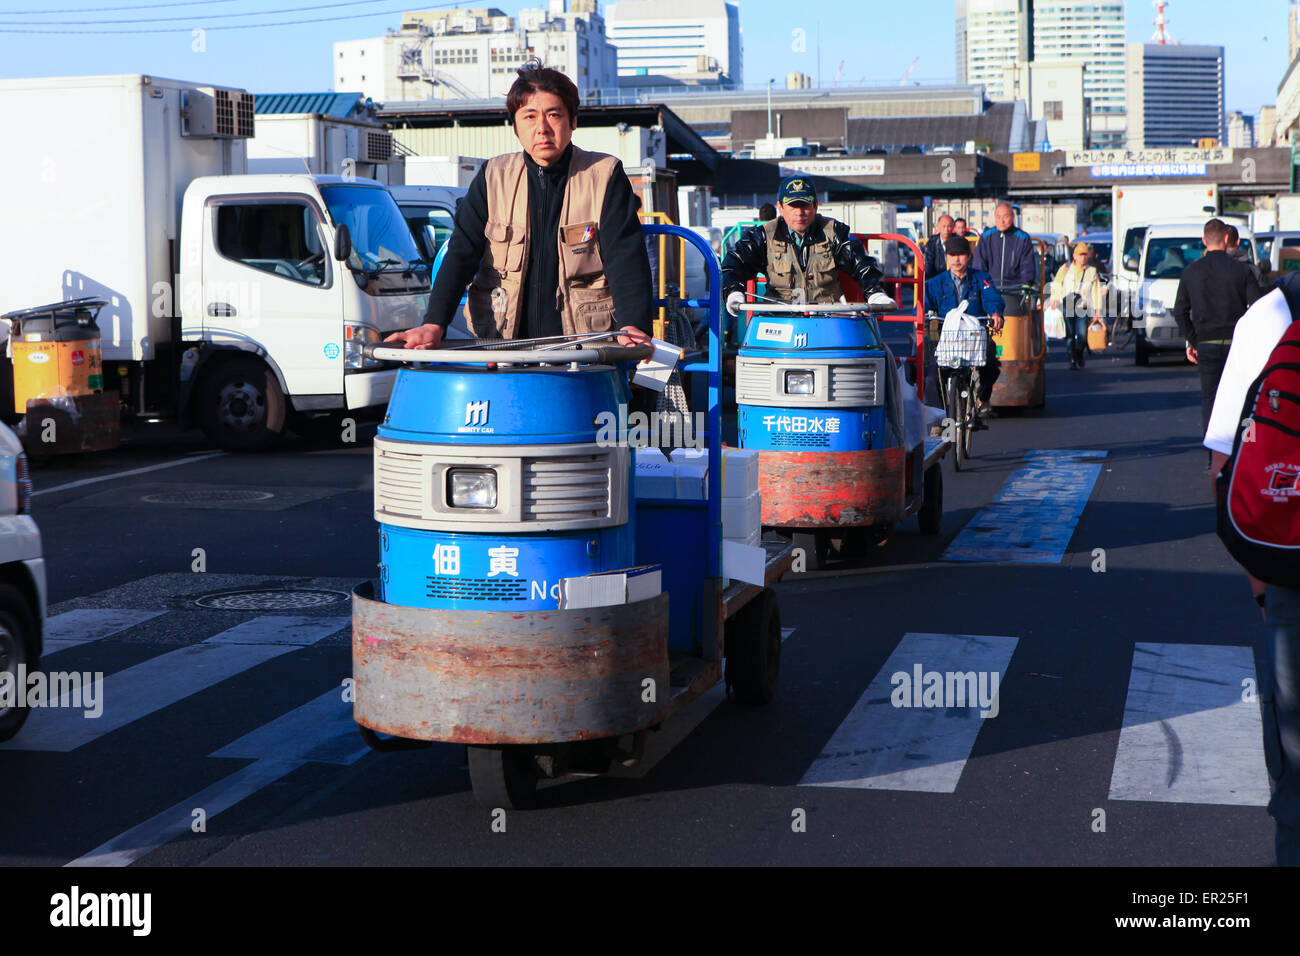 Workers at Famous Tsukiji fish market operational area. Tsukiji is the biggest fish market in the world. Stock Photo